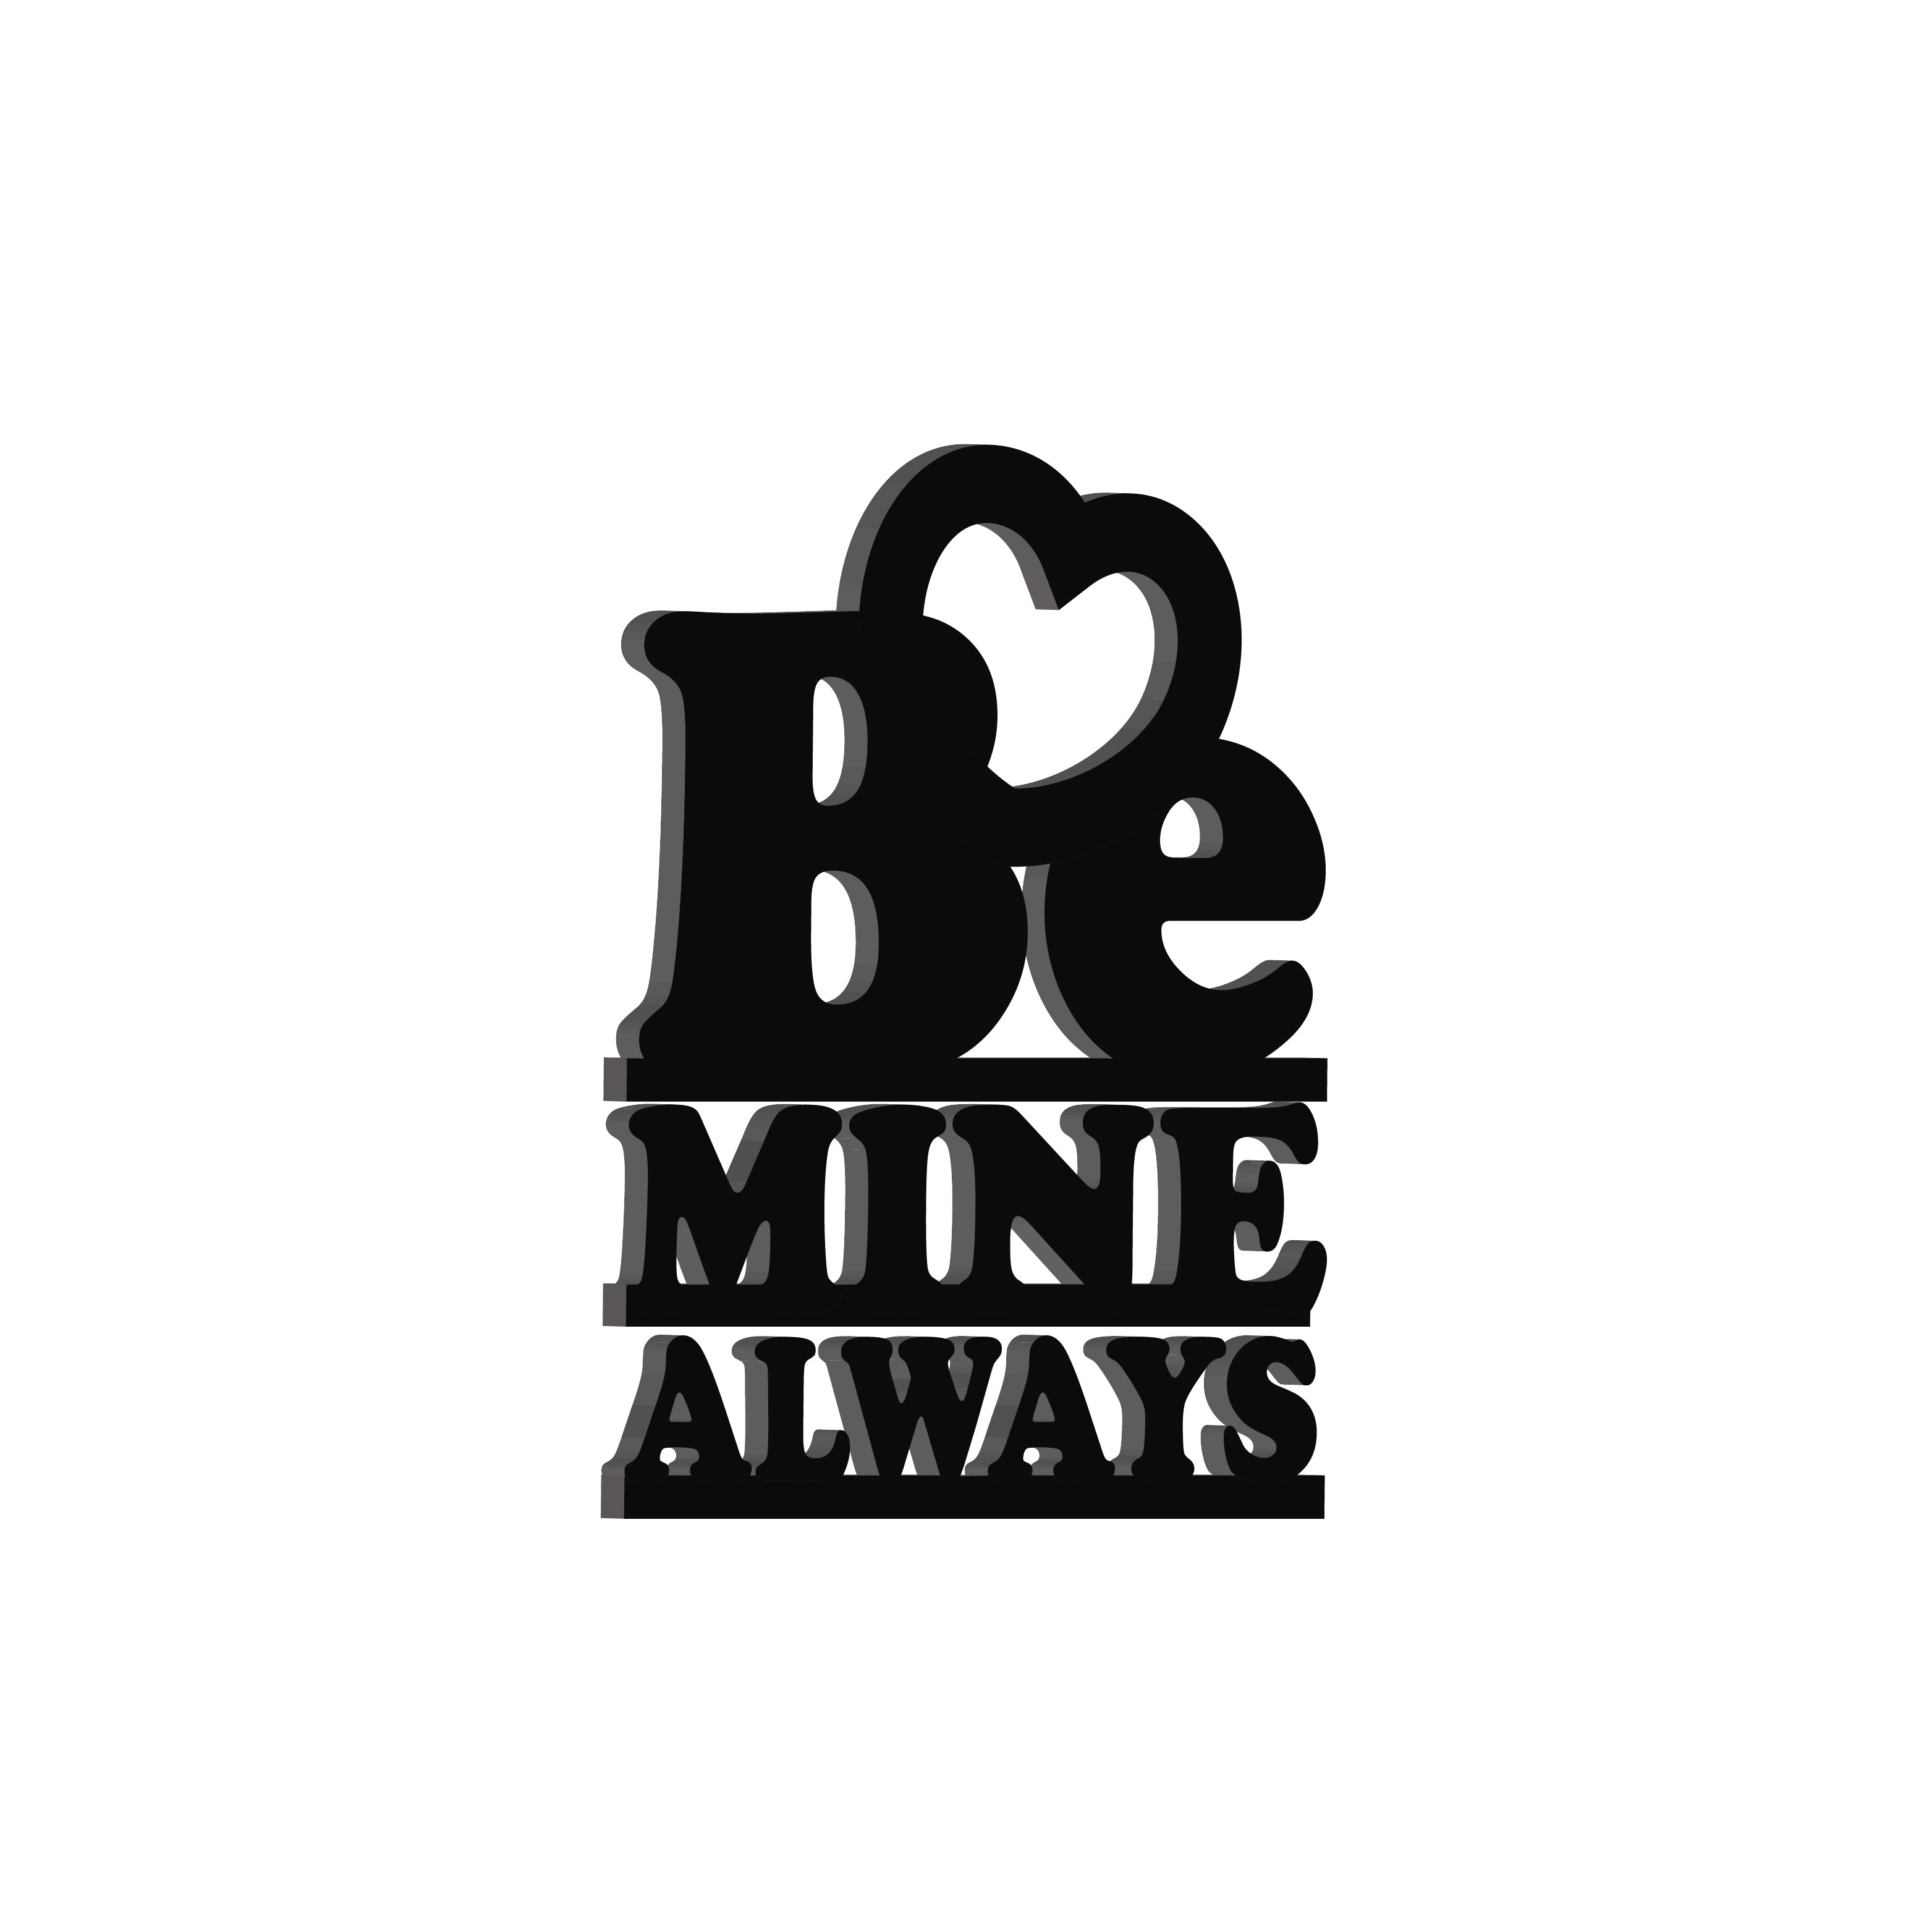 "Be Mine Always" Black Engineered Wood Wall Art Cutout, Ready to Hang Home Decor 4